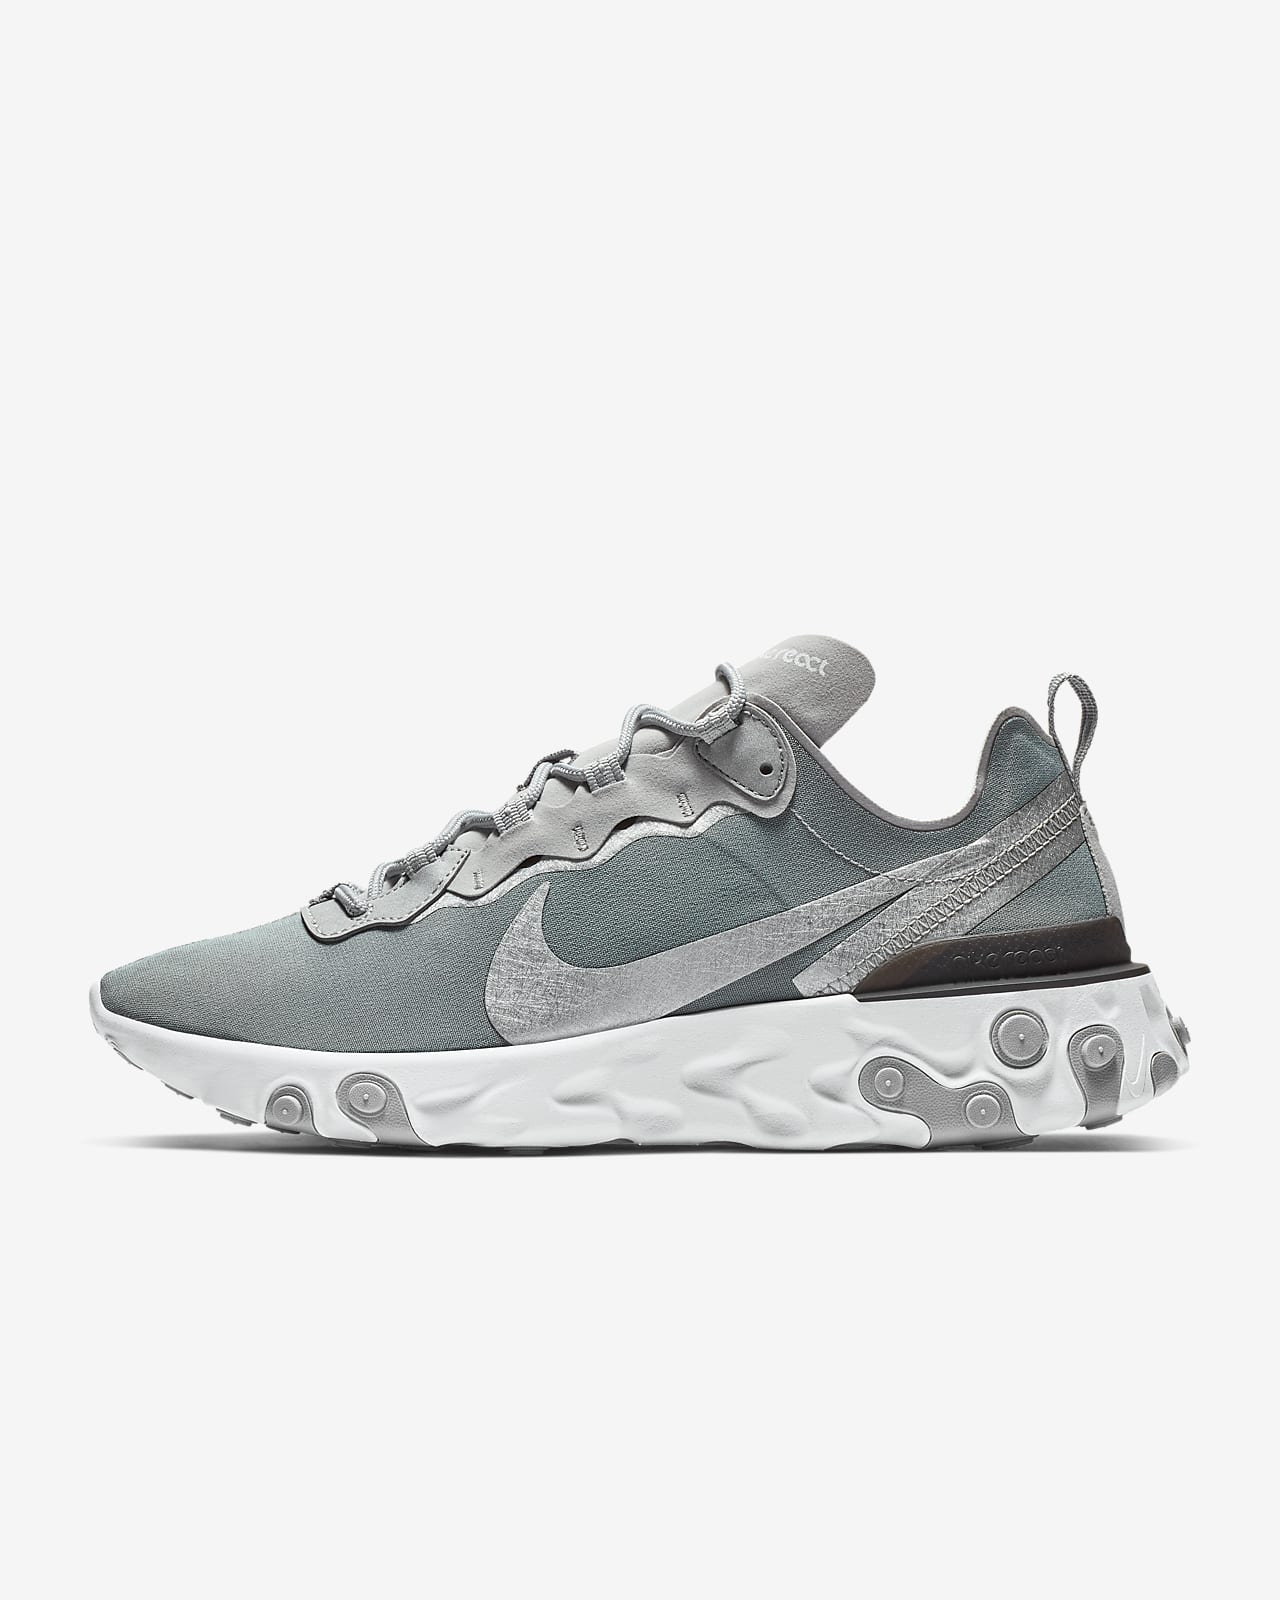 nike react element mens trainers